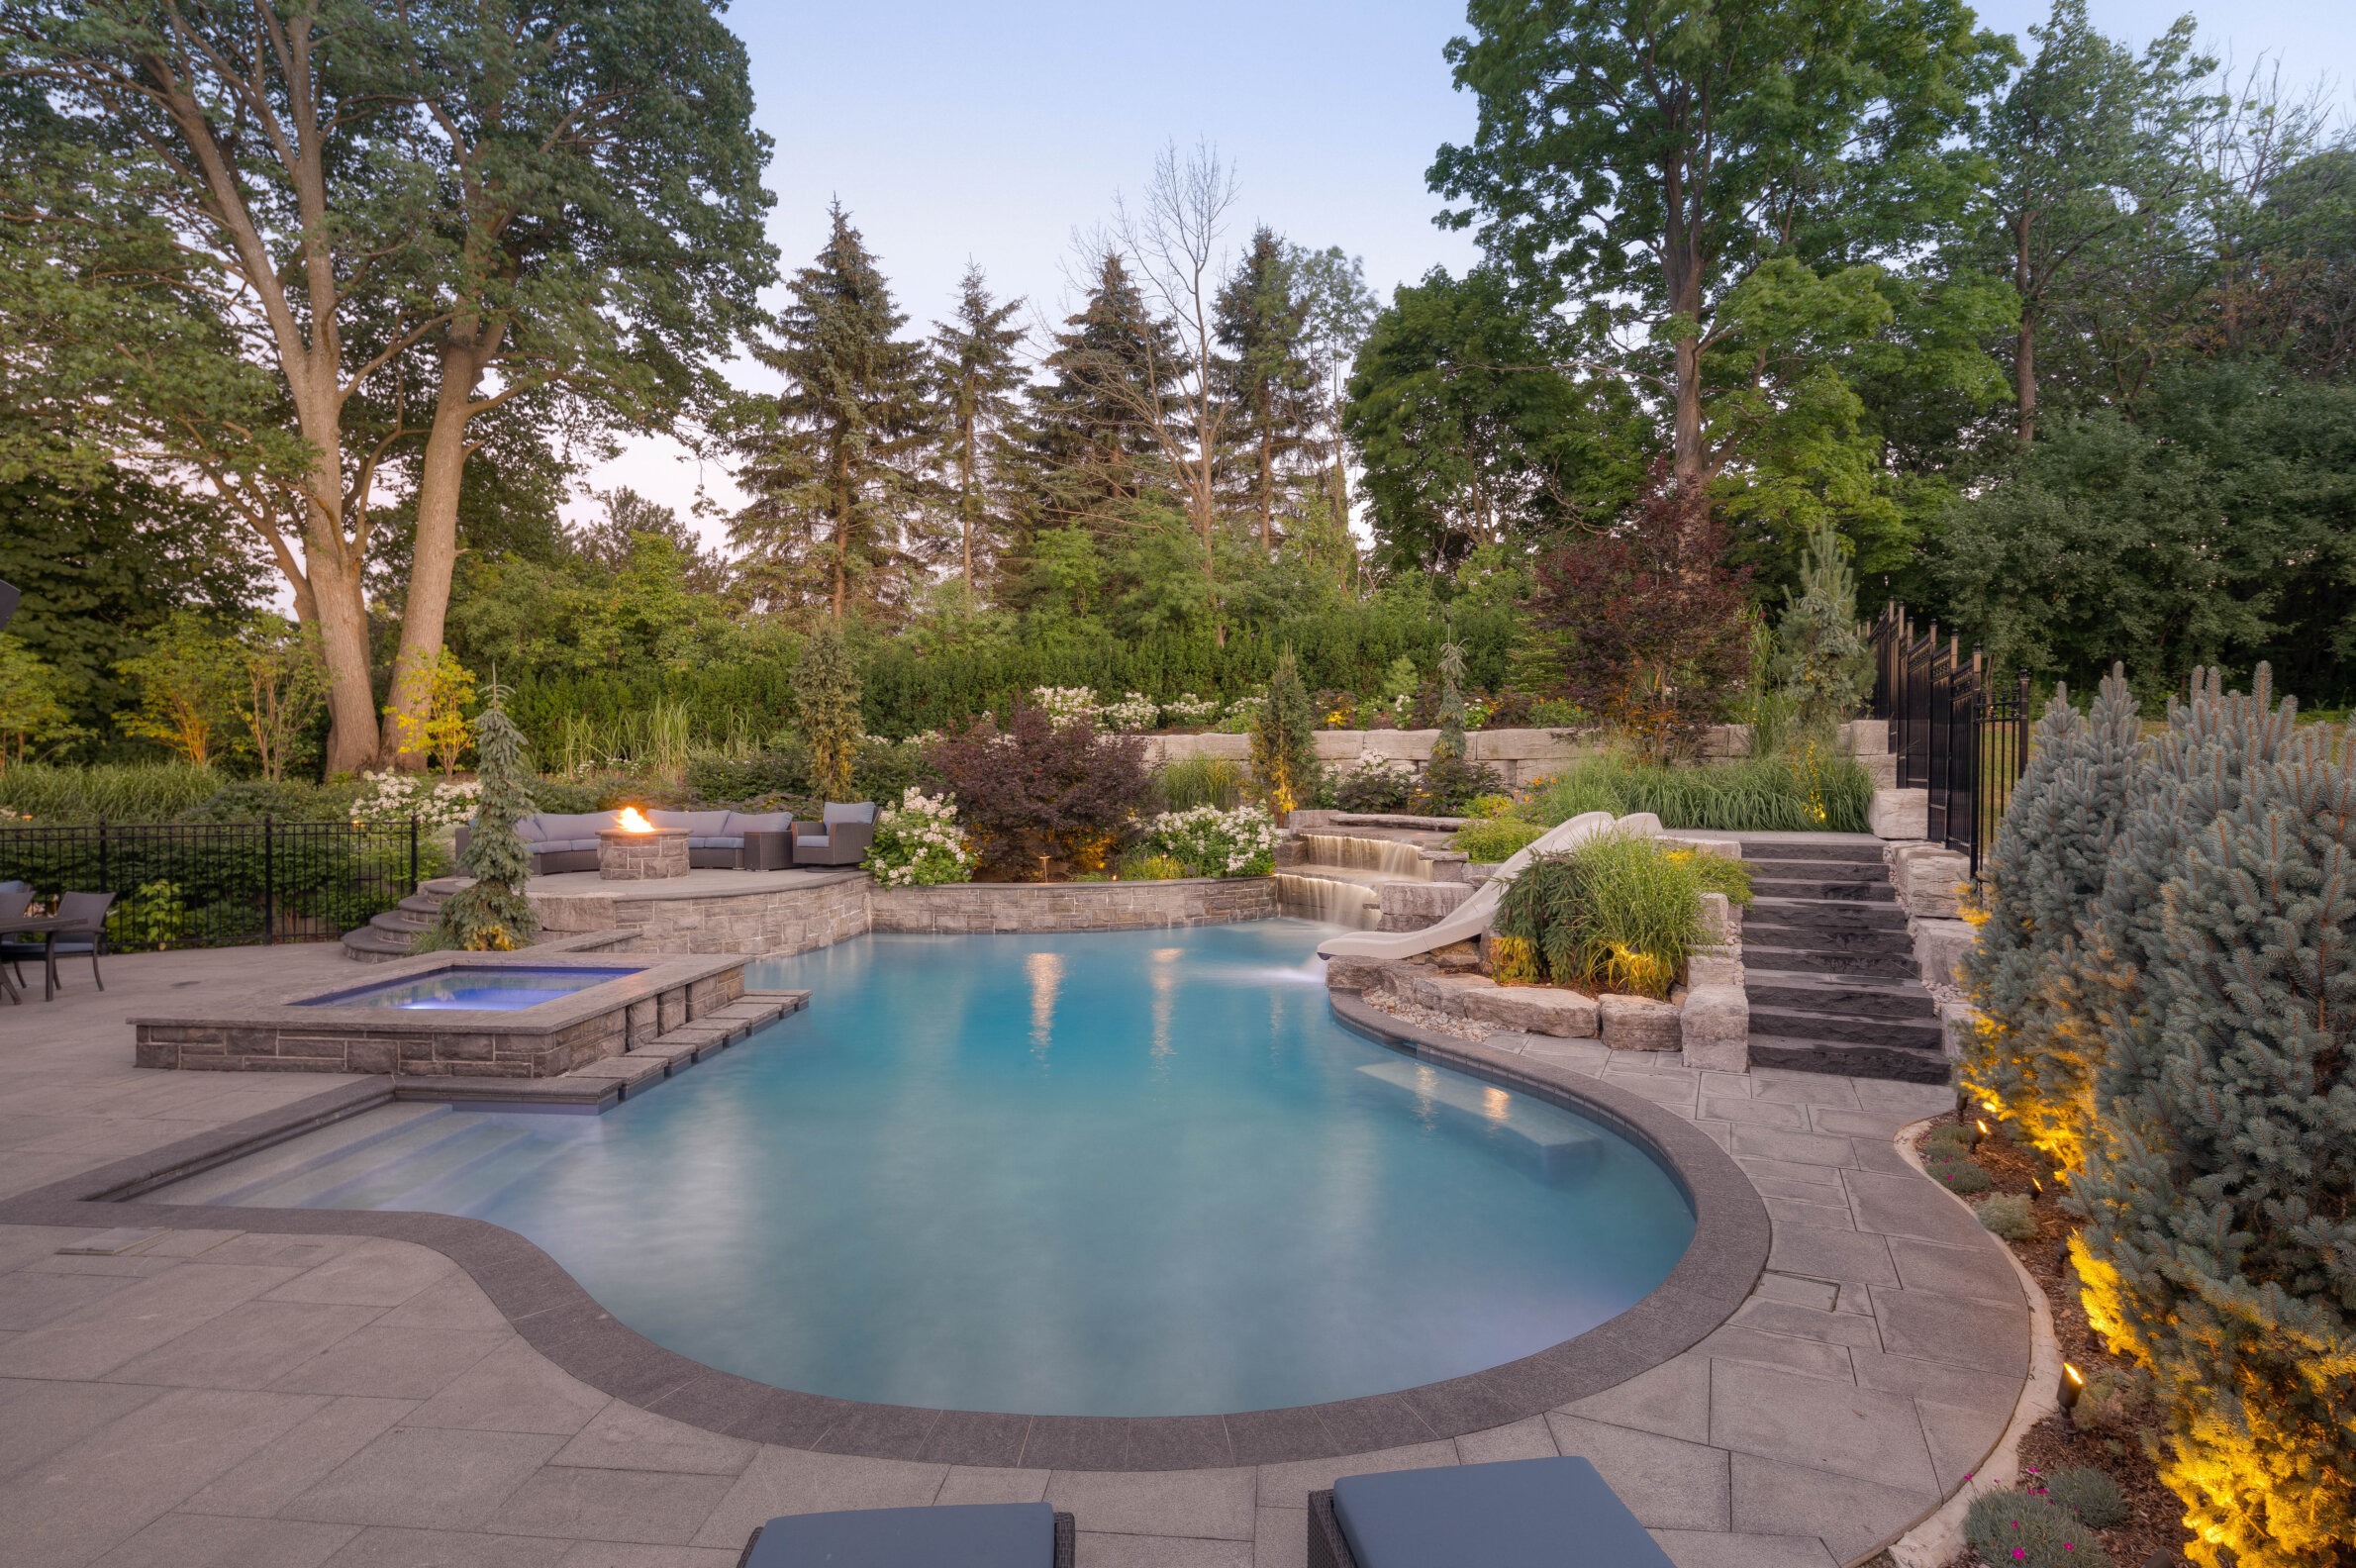 An elegant backyard featuring a swimming pool with a curving staircase, slide, hot tub, outdoor seating area, landscaped gardens, and mood lighting at dusk.